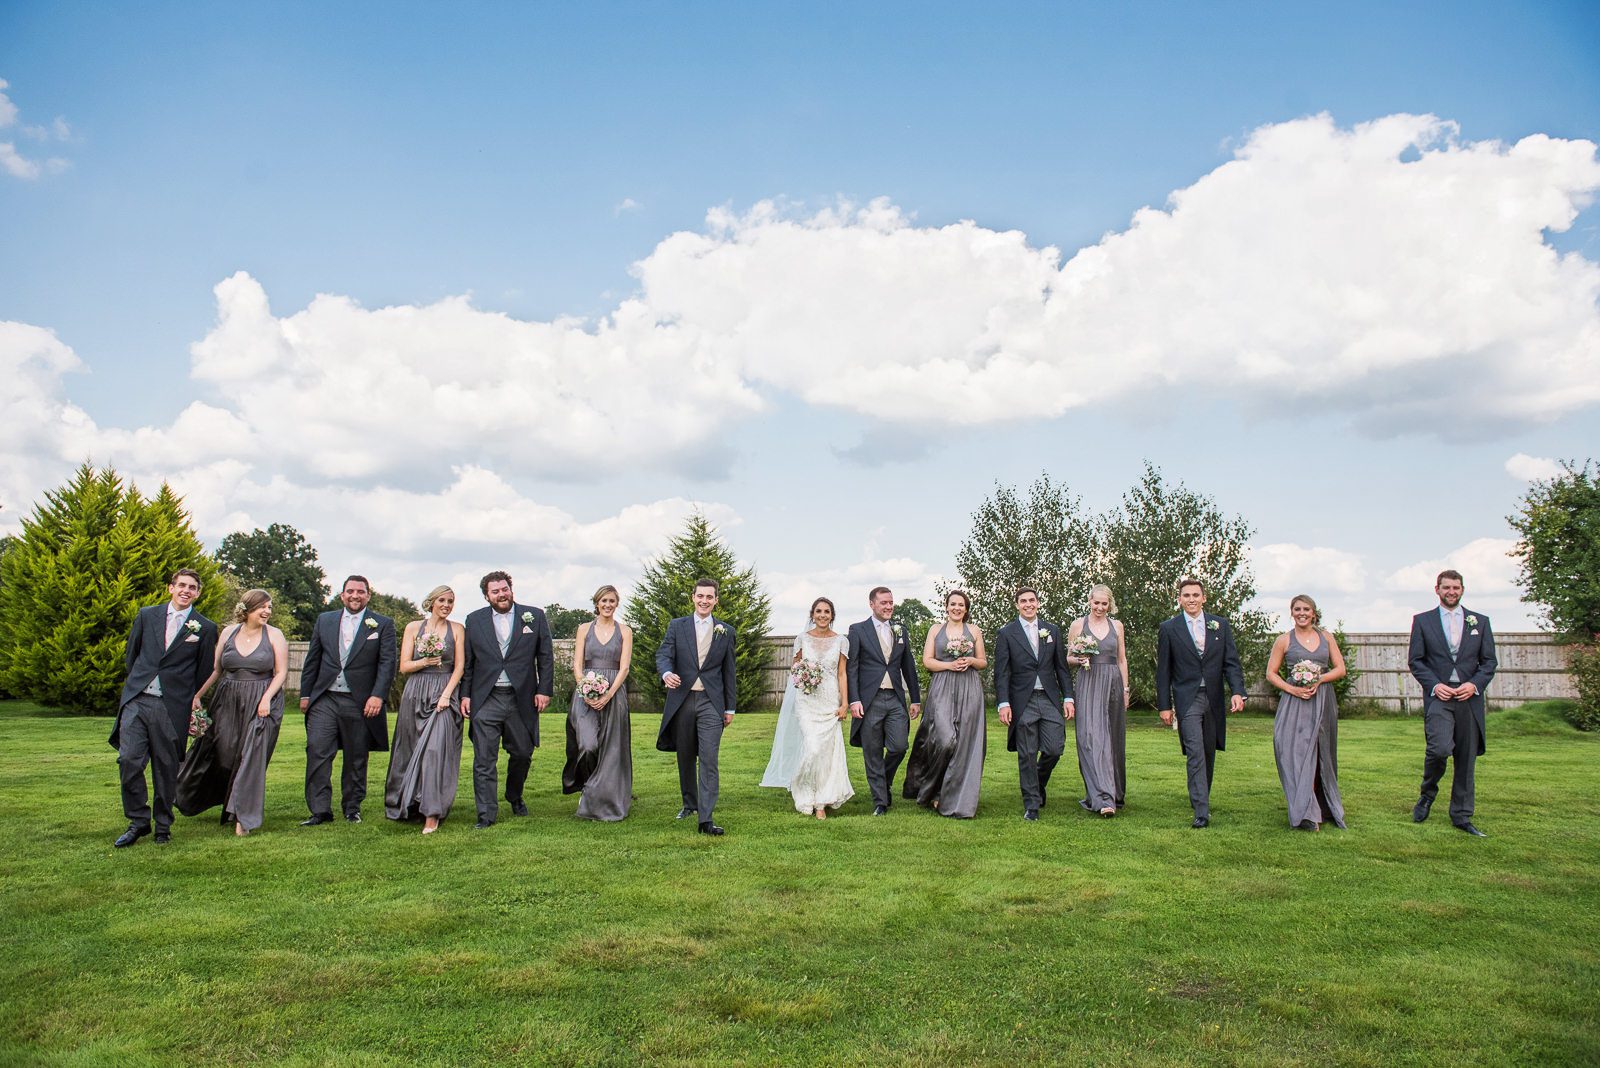 Fun and fabulous walking shot of the bridal and grooms parties walking together smiling.